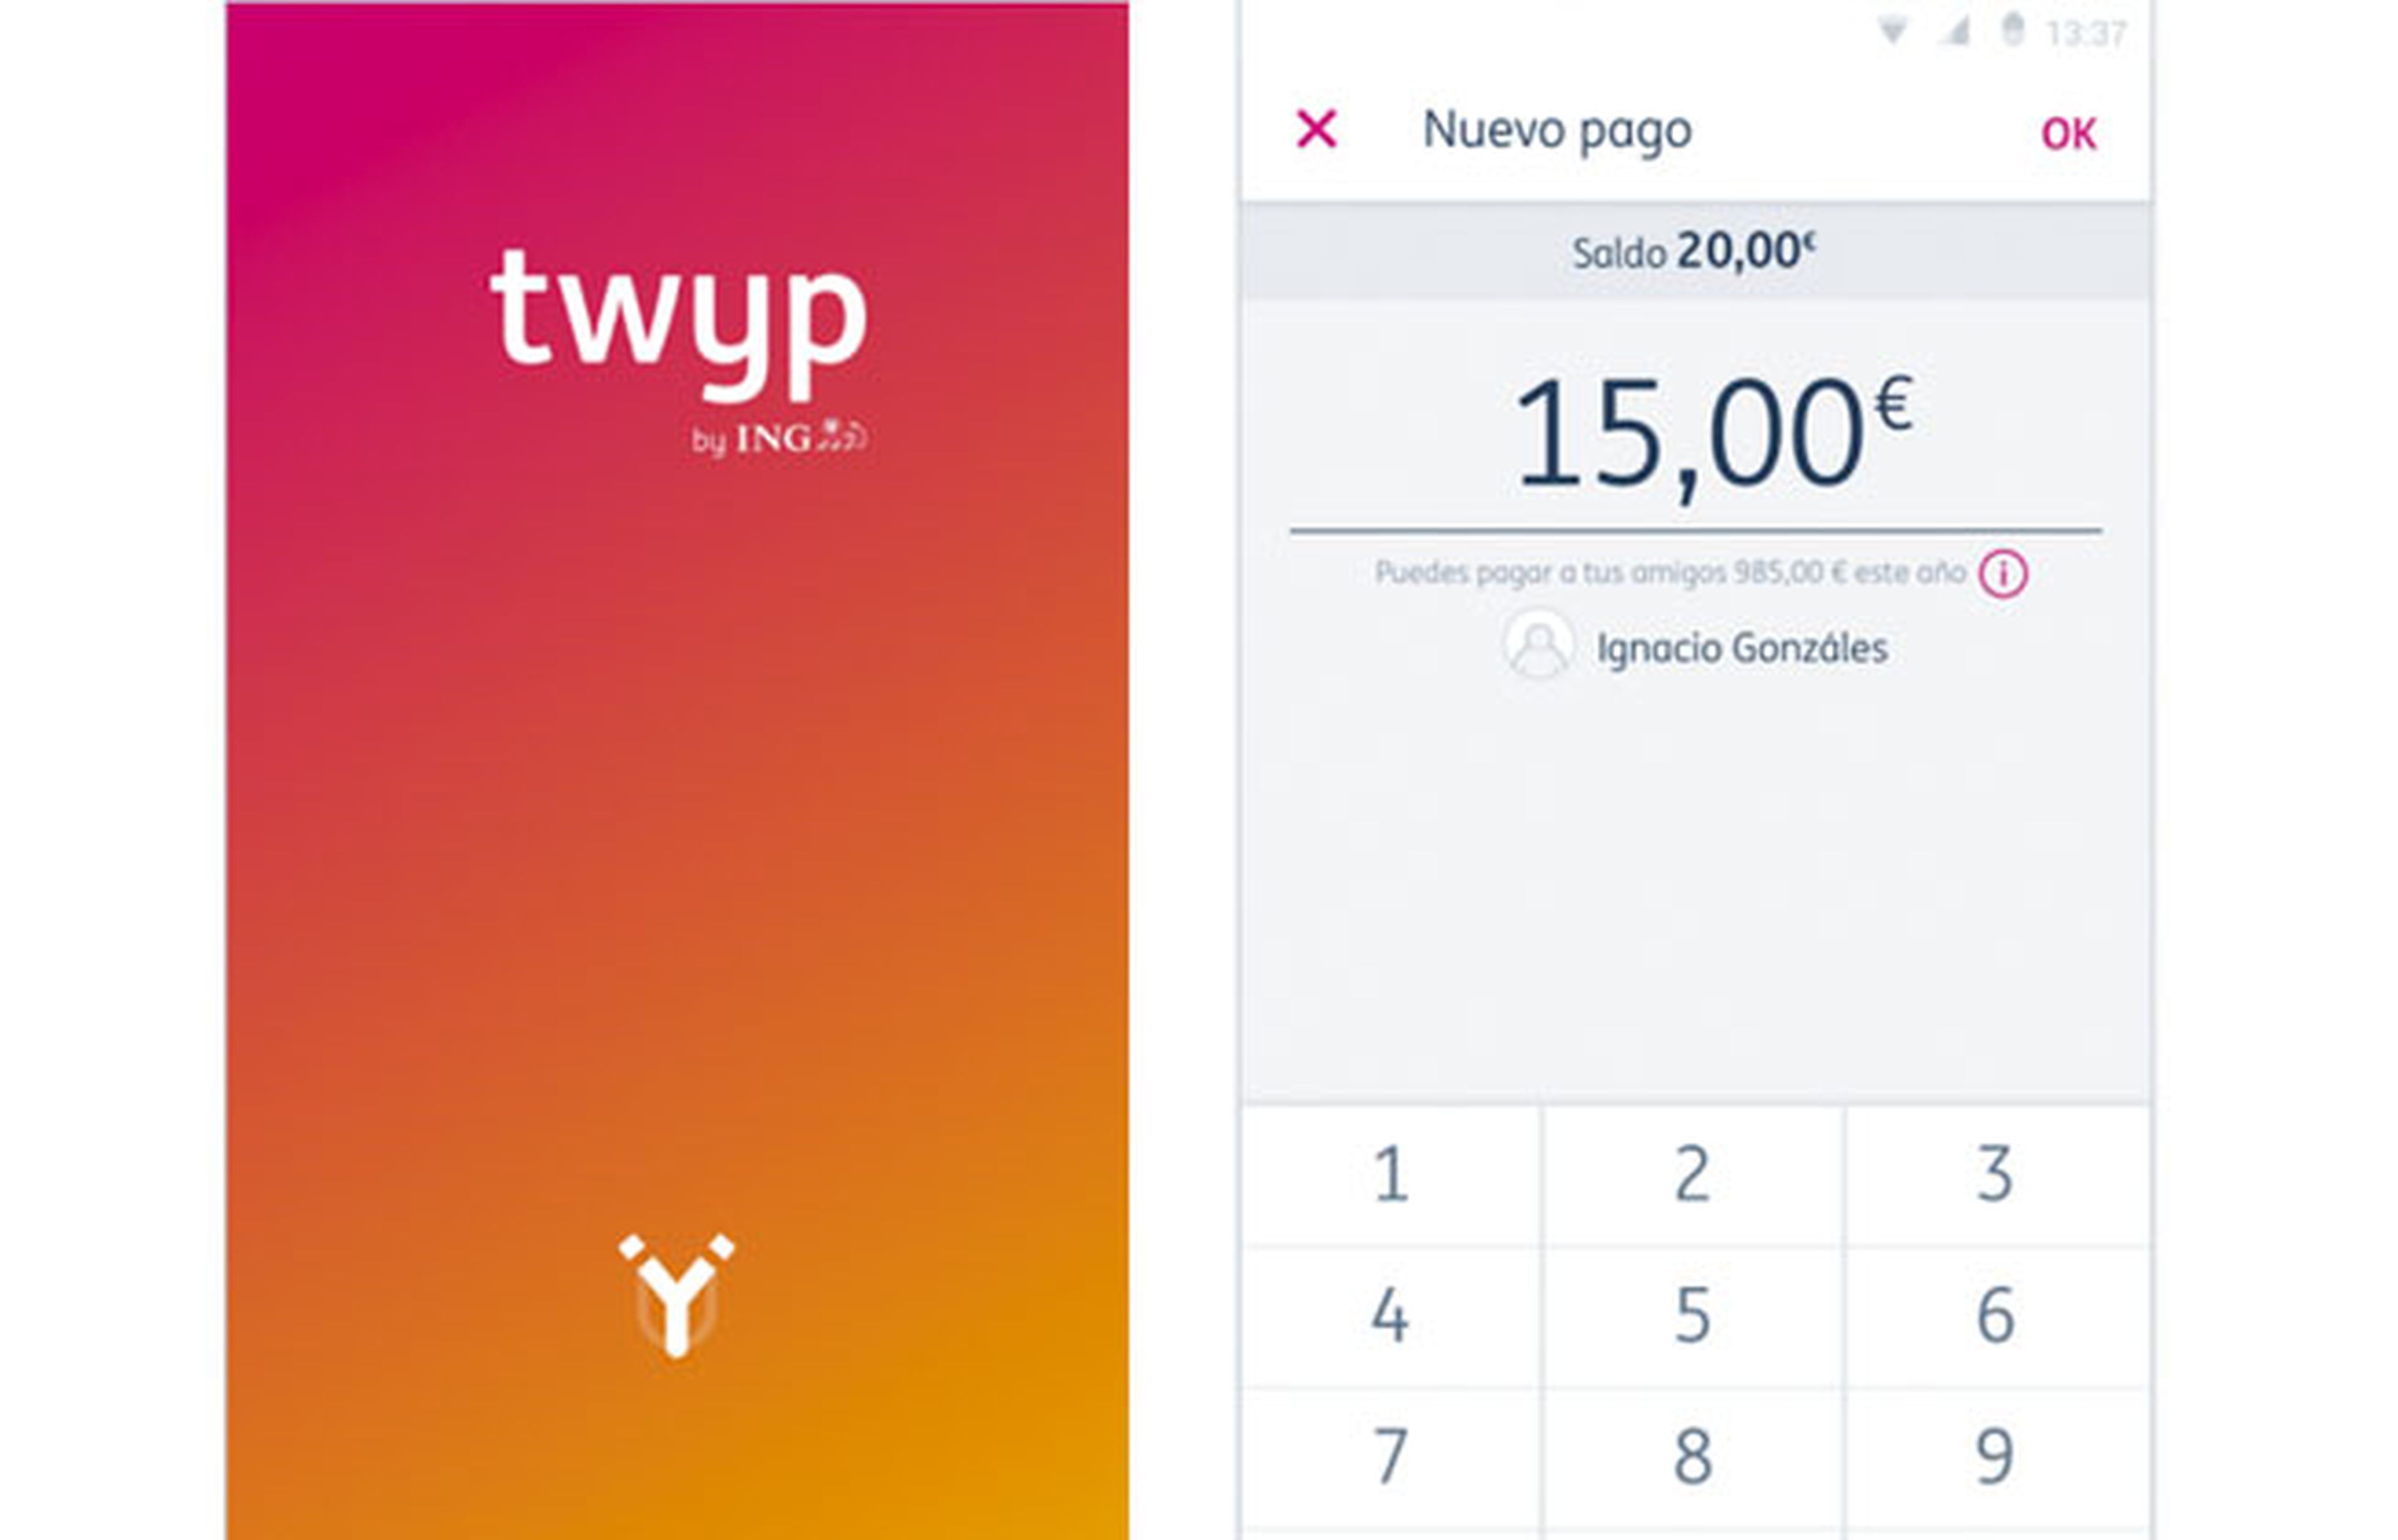 Twyp by ING